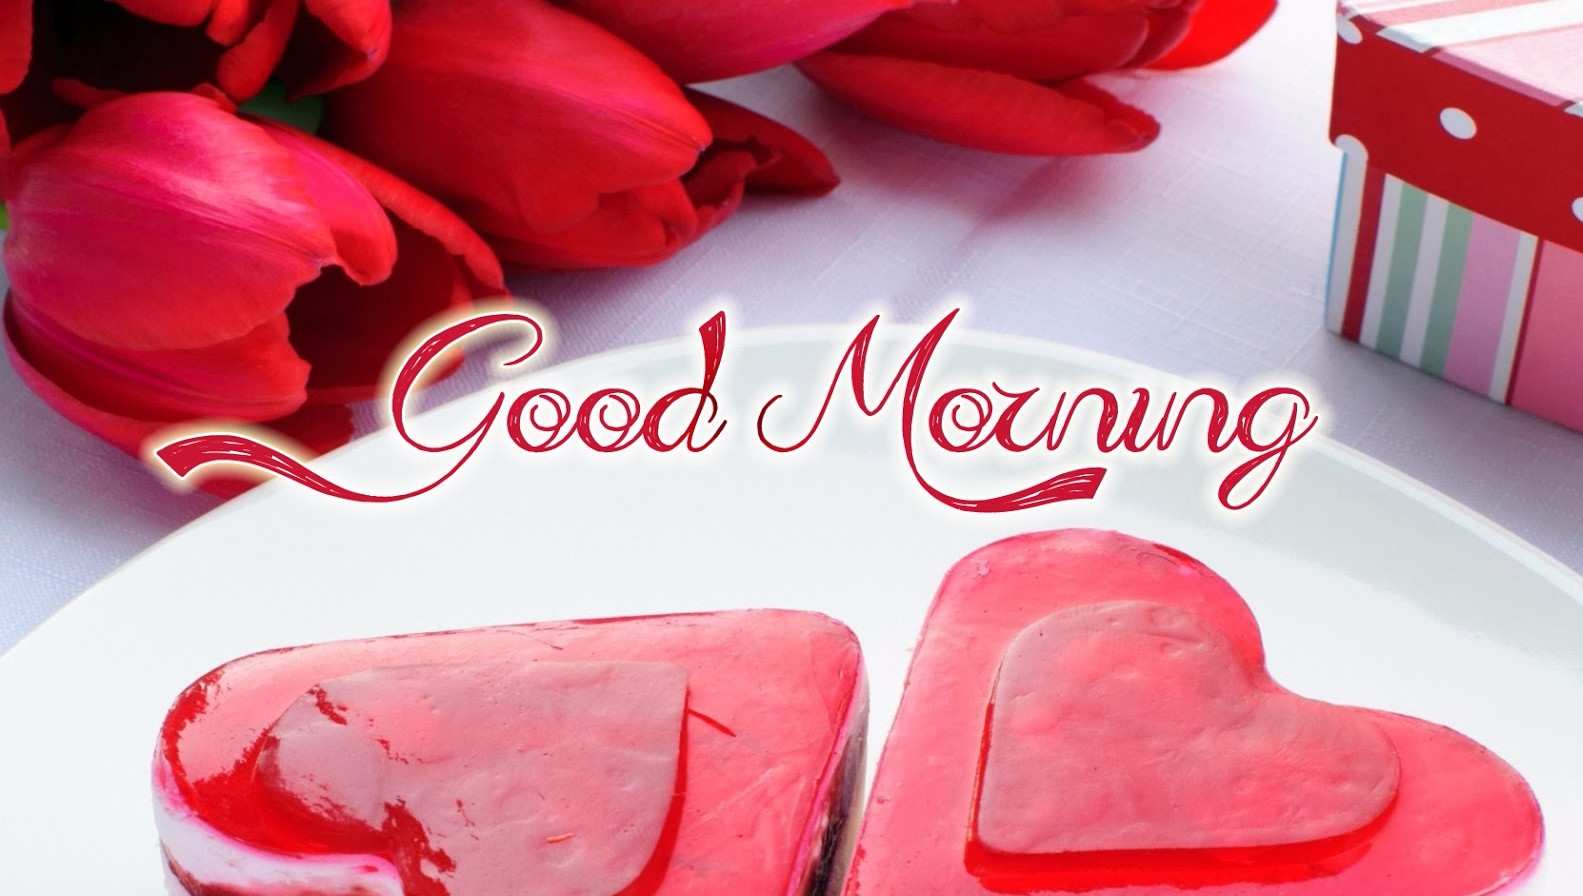 Good Morning HD Image Top Wallpaper For Mobile